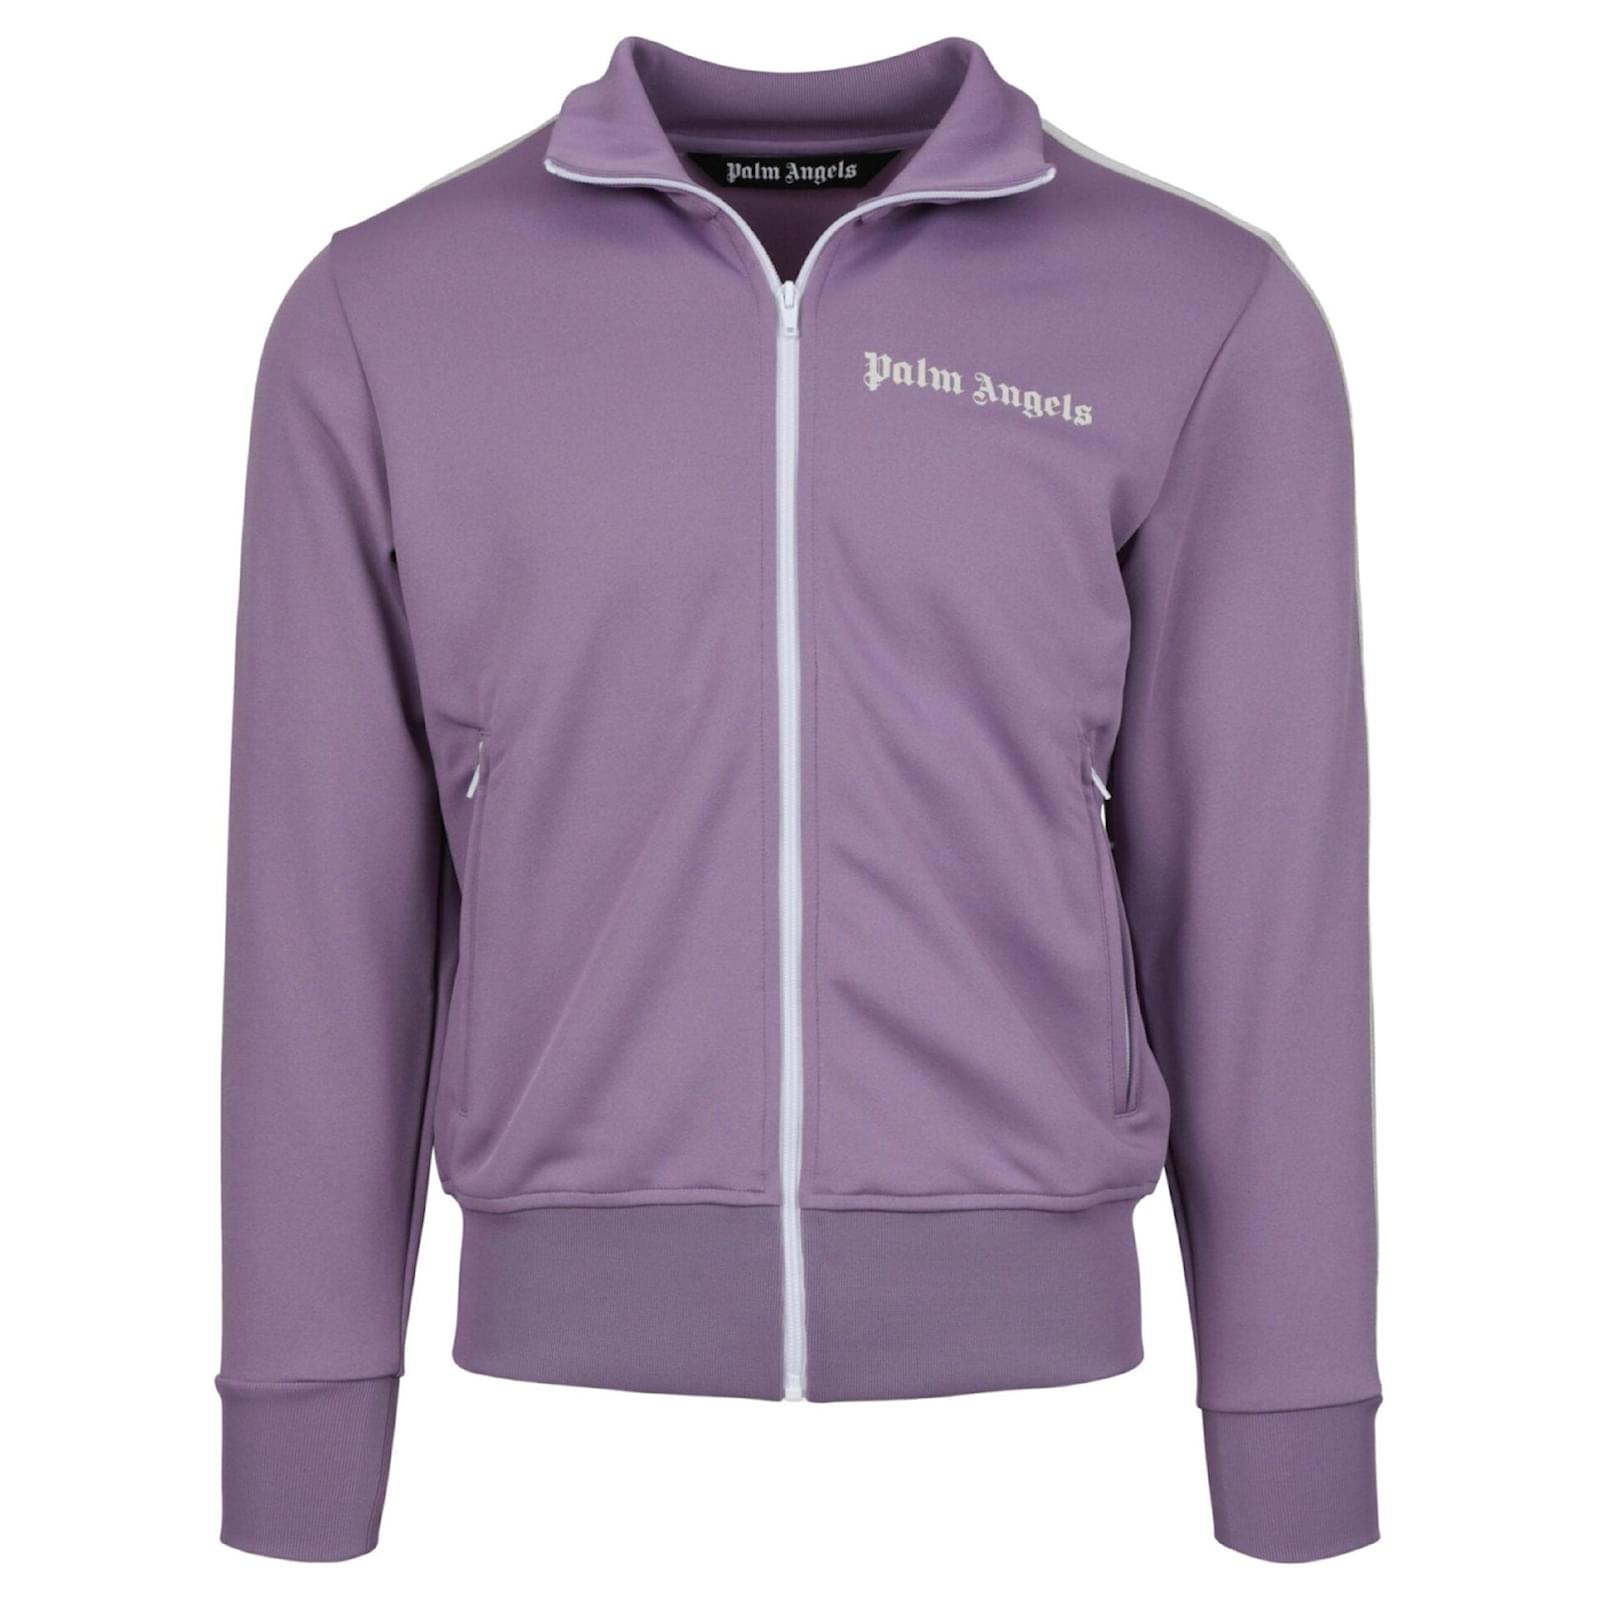 PURPLE TRACK JACKET in purple - Palm Angels® Official